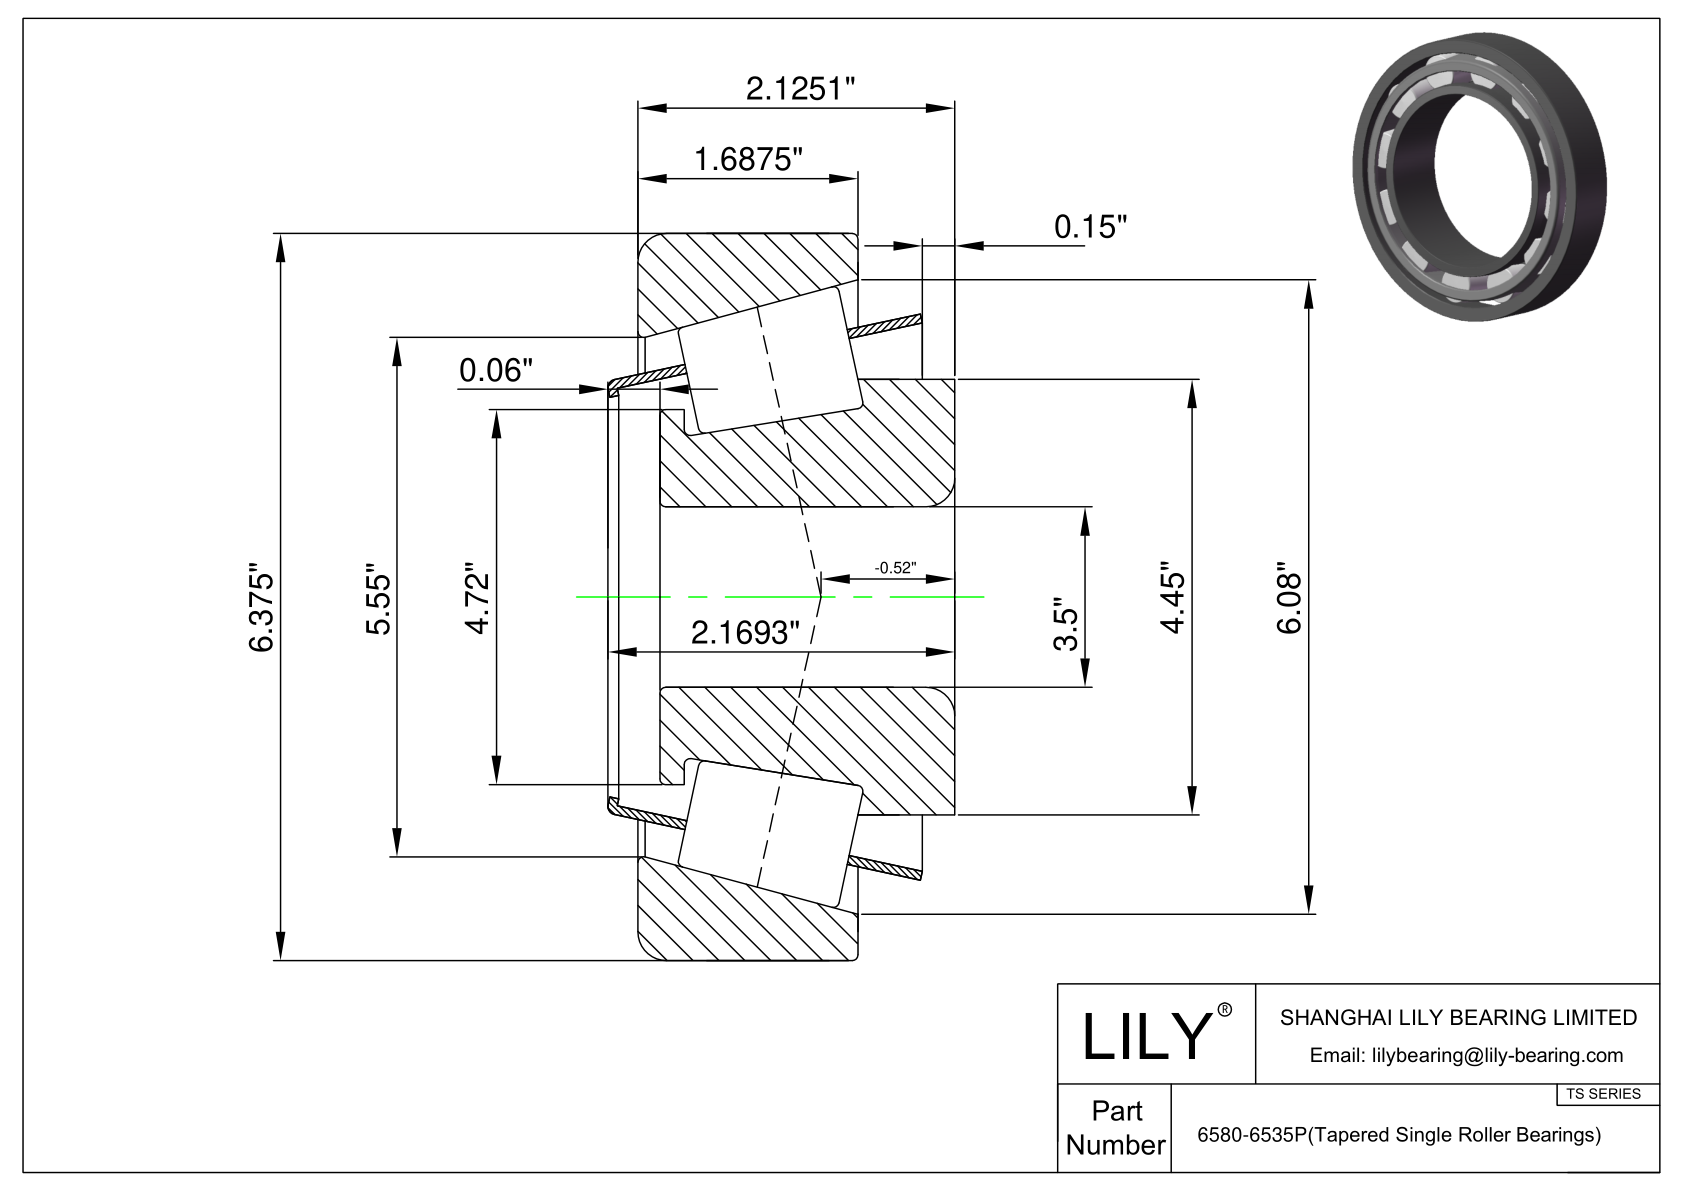 6580-6535P TS (Tapered Single Roller Bearings) (Imperial) cad drawing